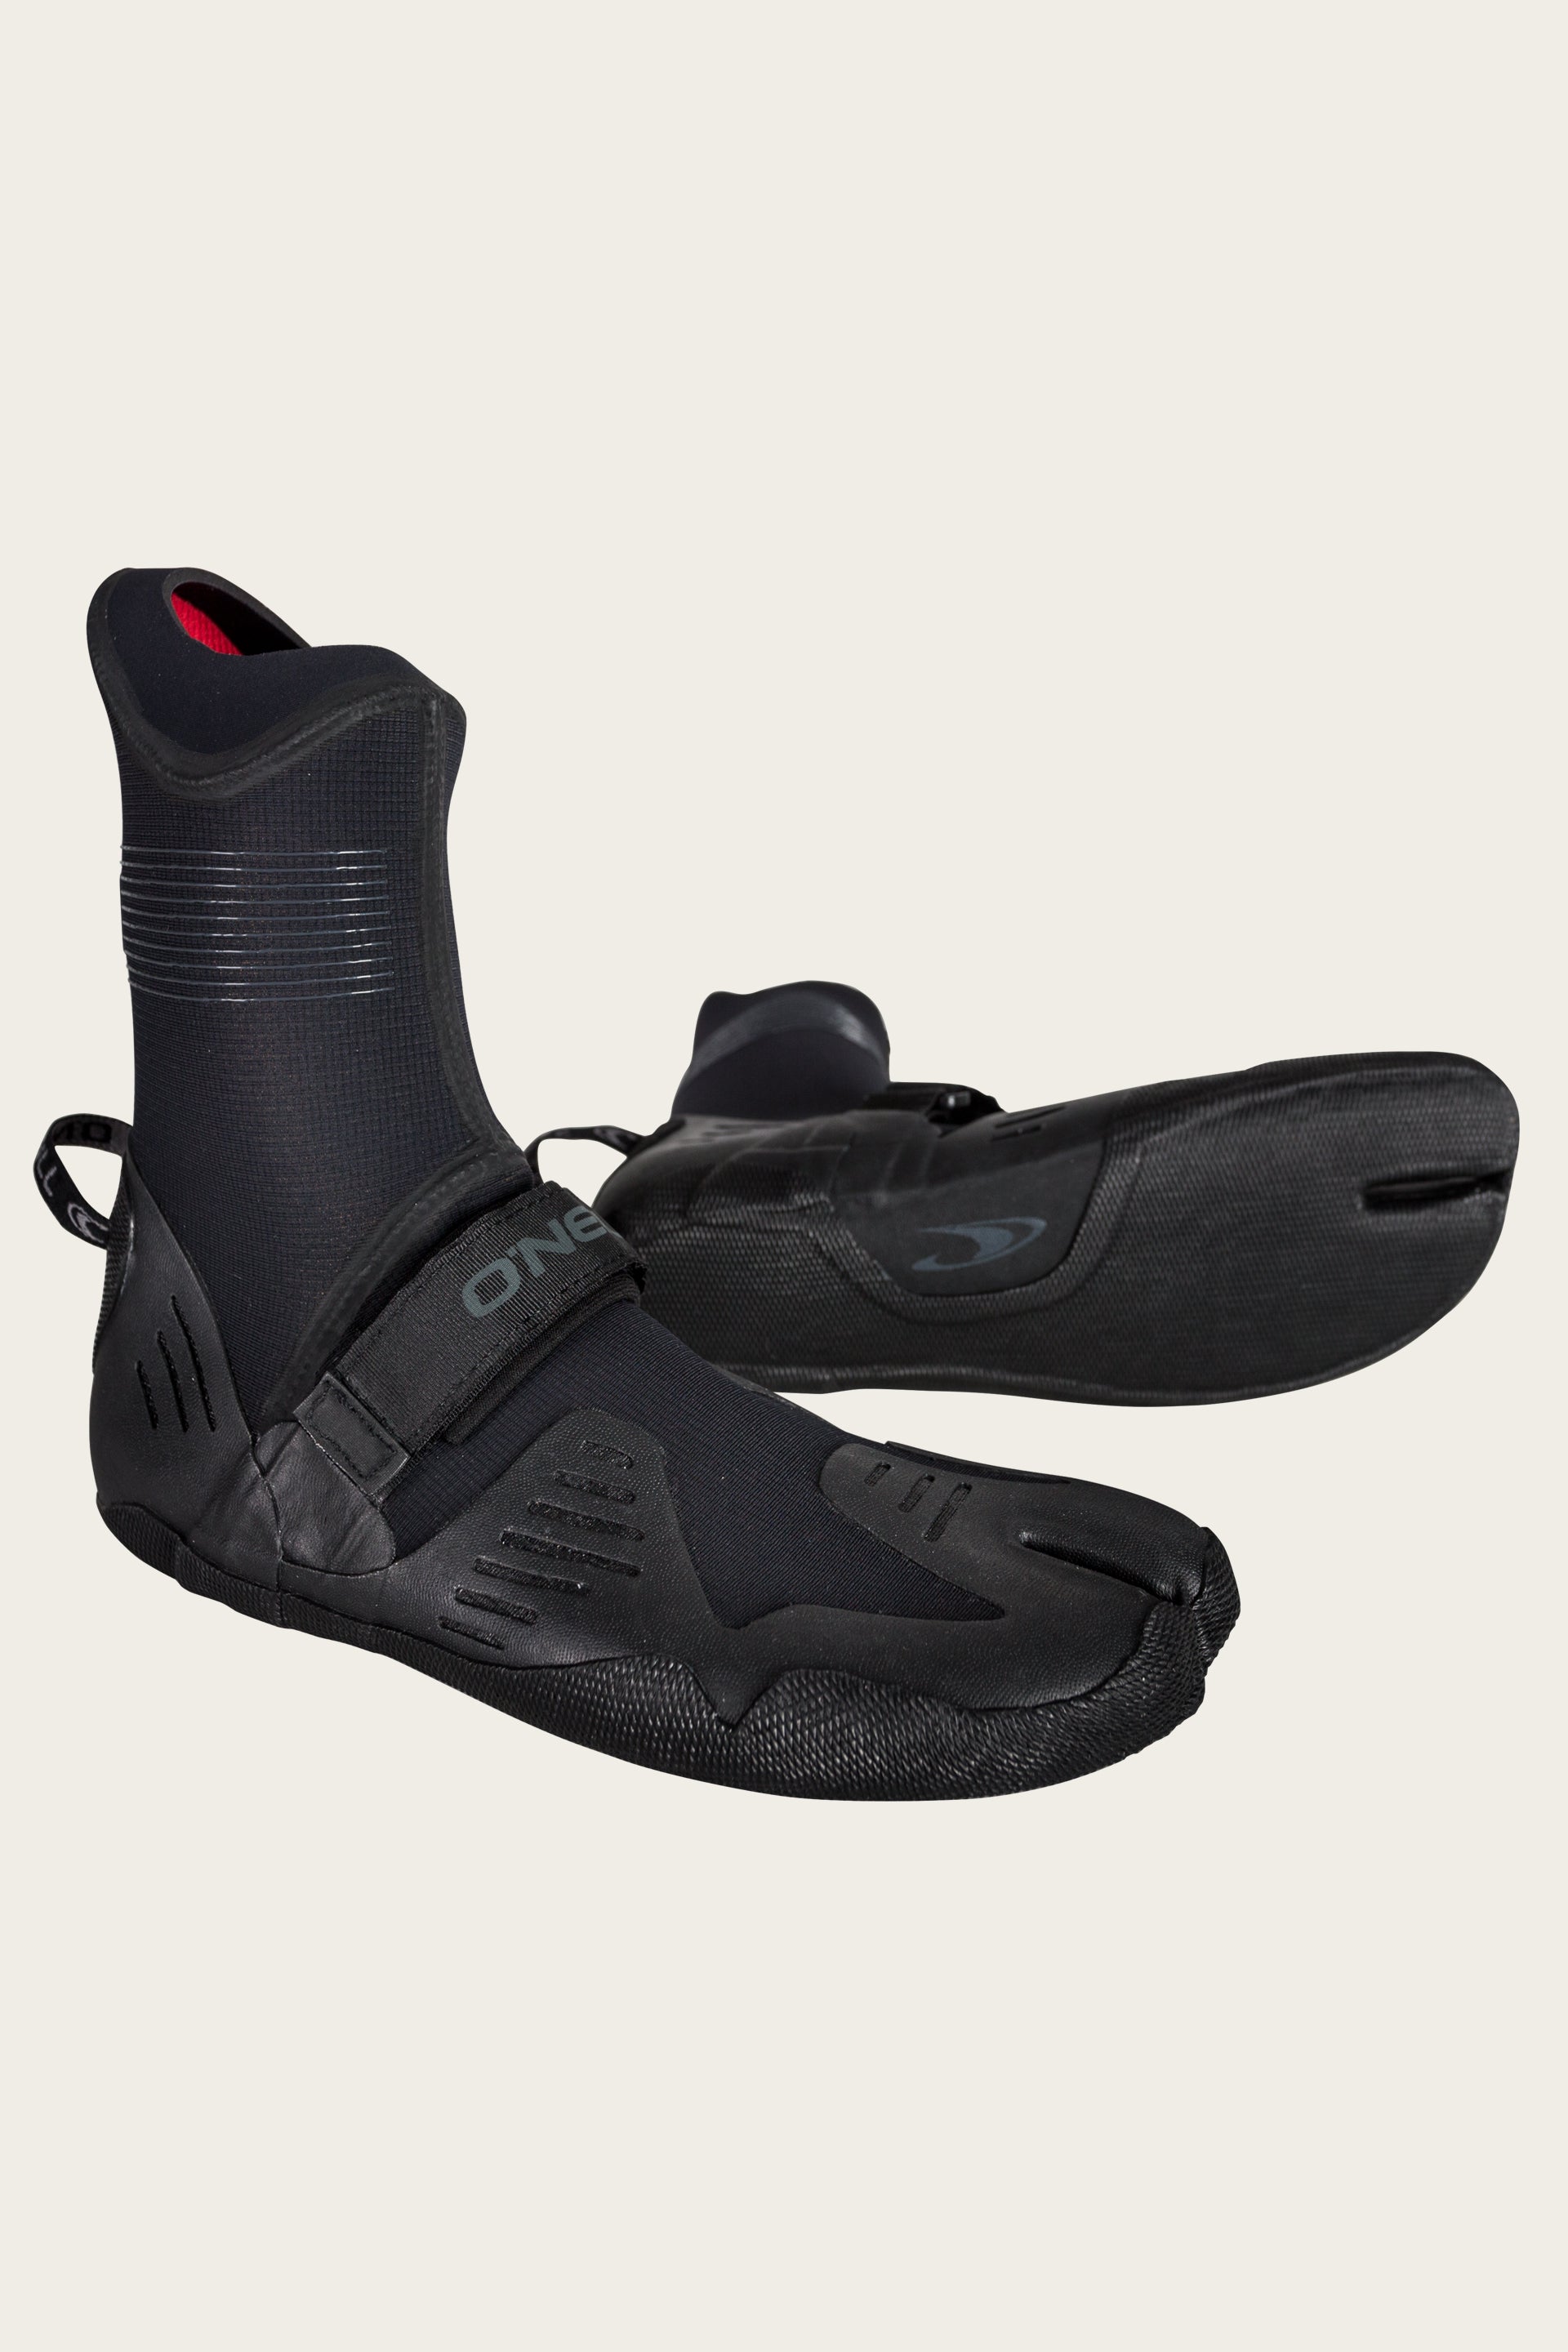 Circle One split toe 5mm wetsuit boots 